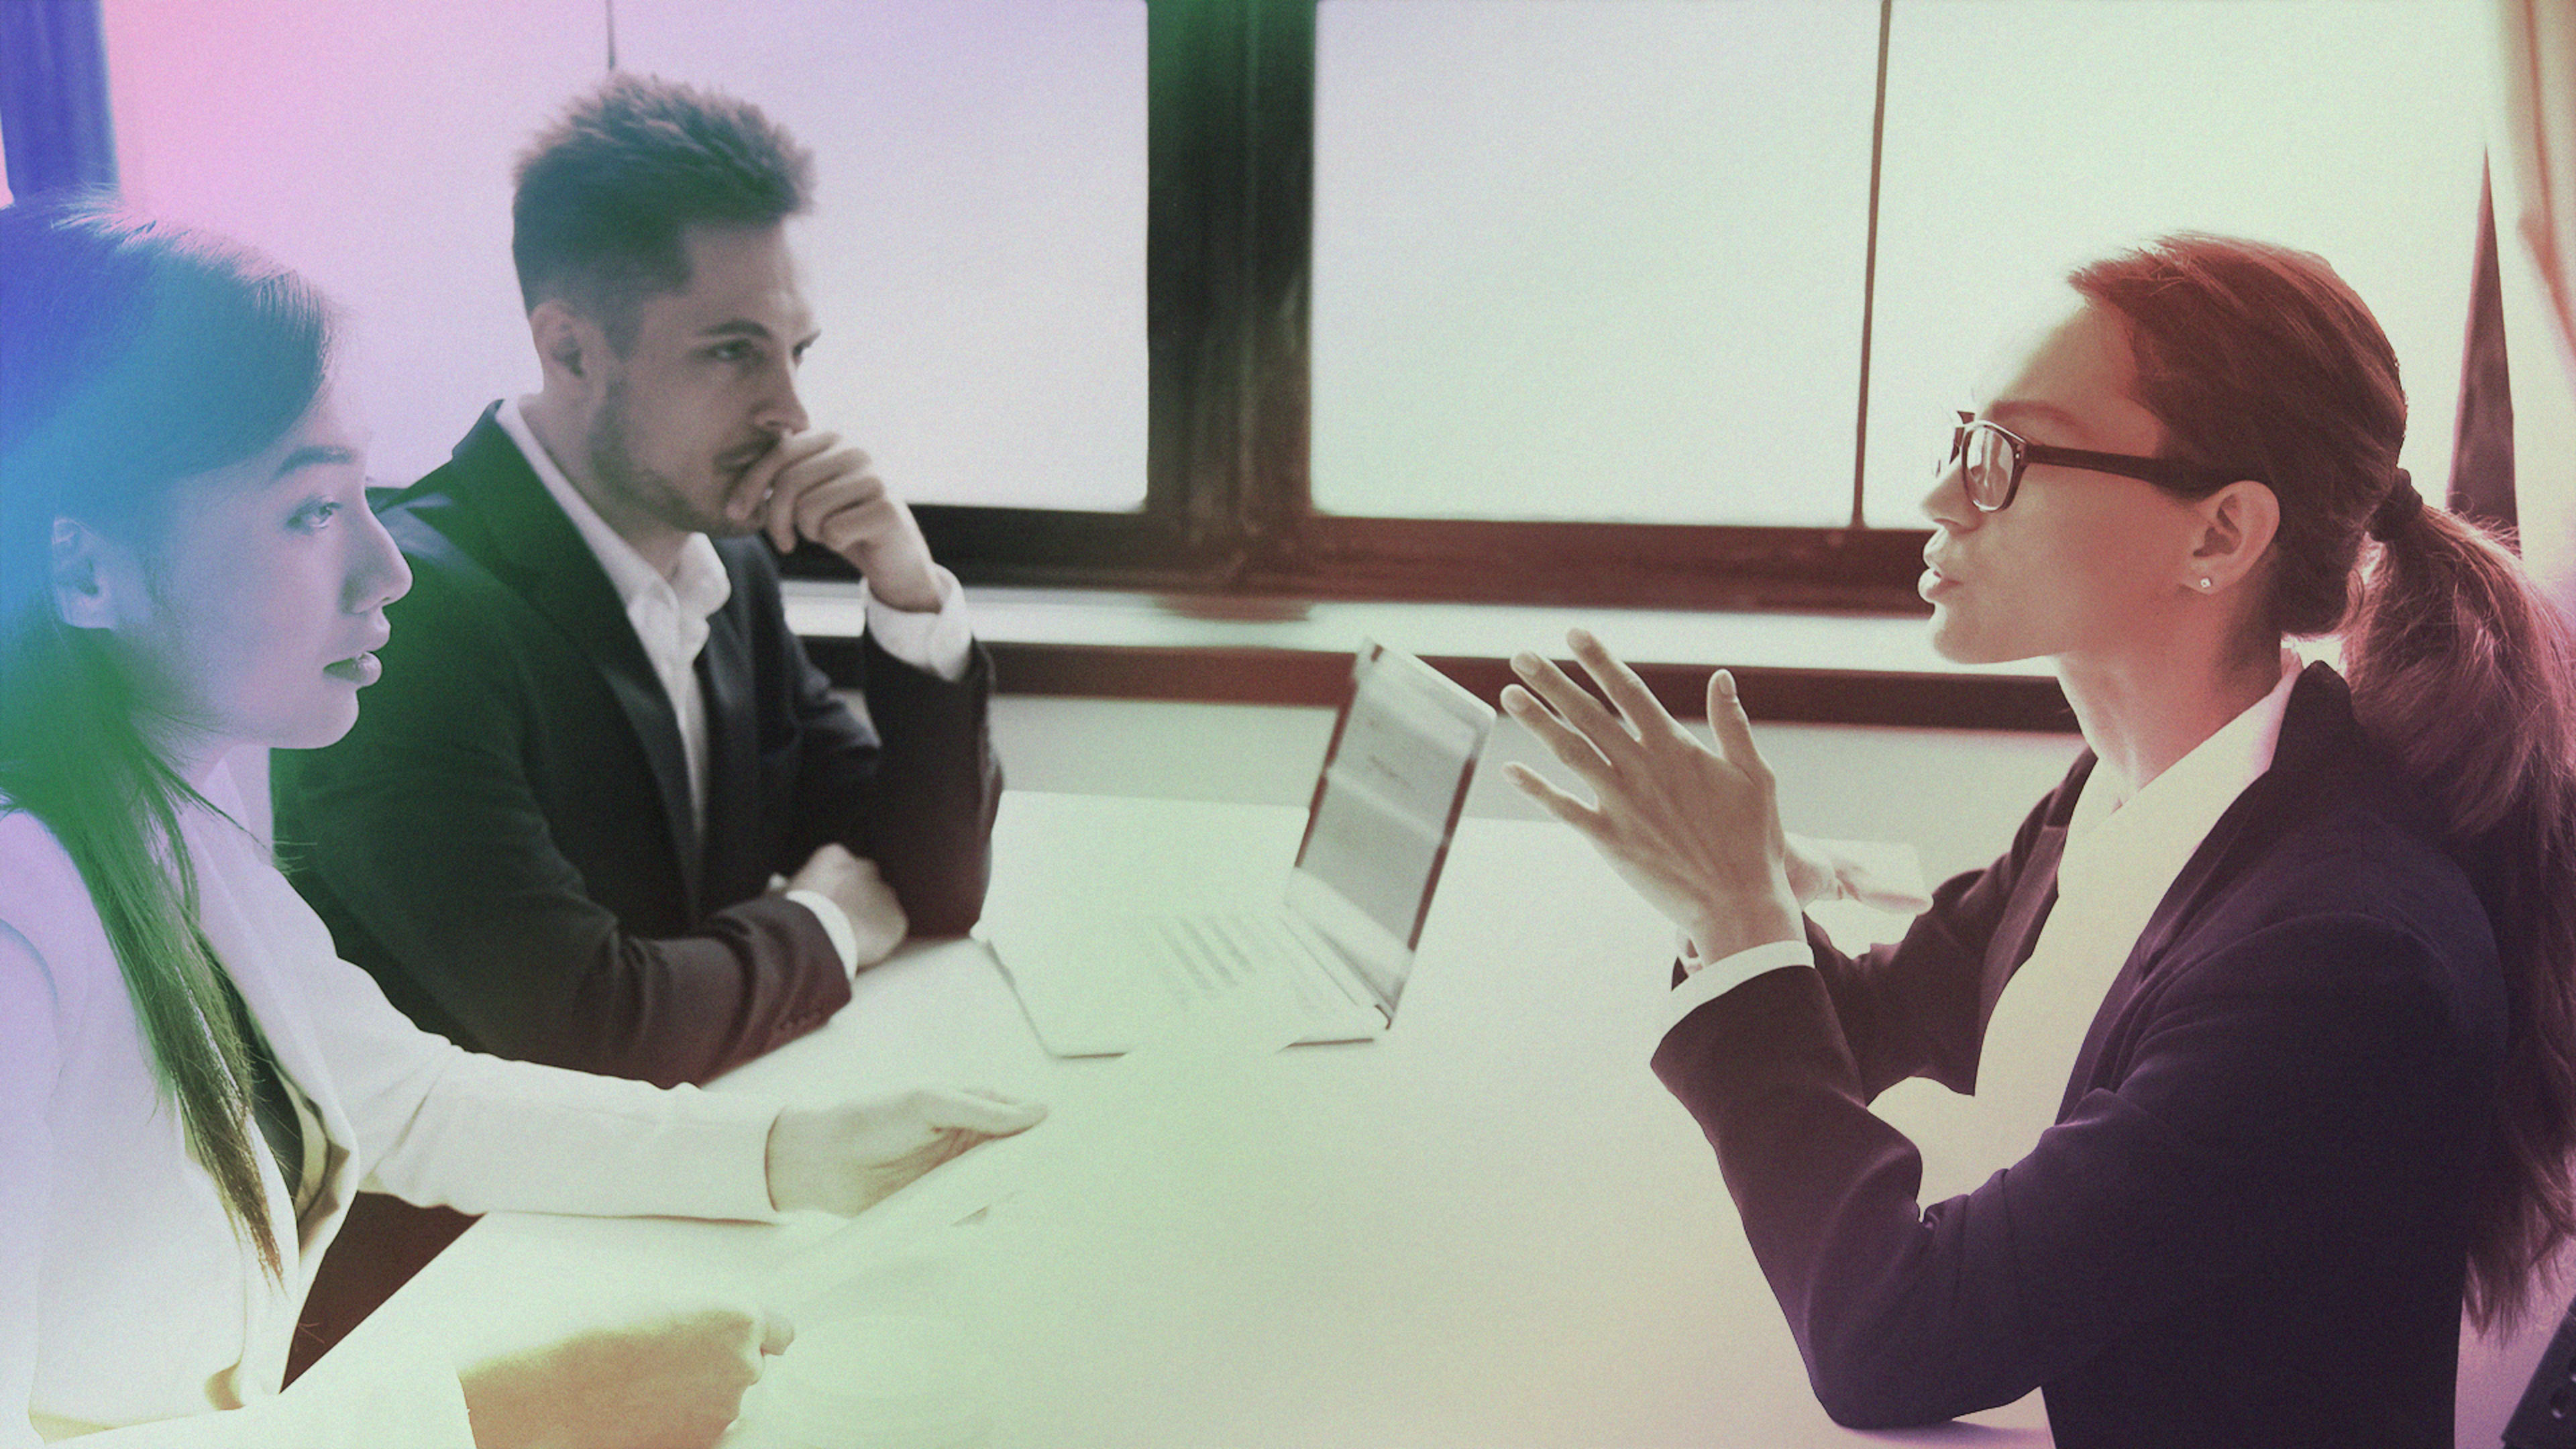 Make sure you ask these questions at the end of the job interview